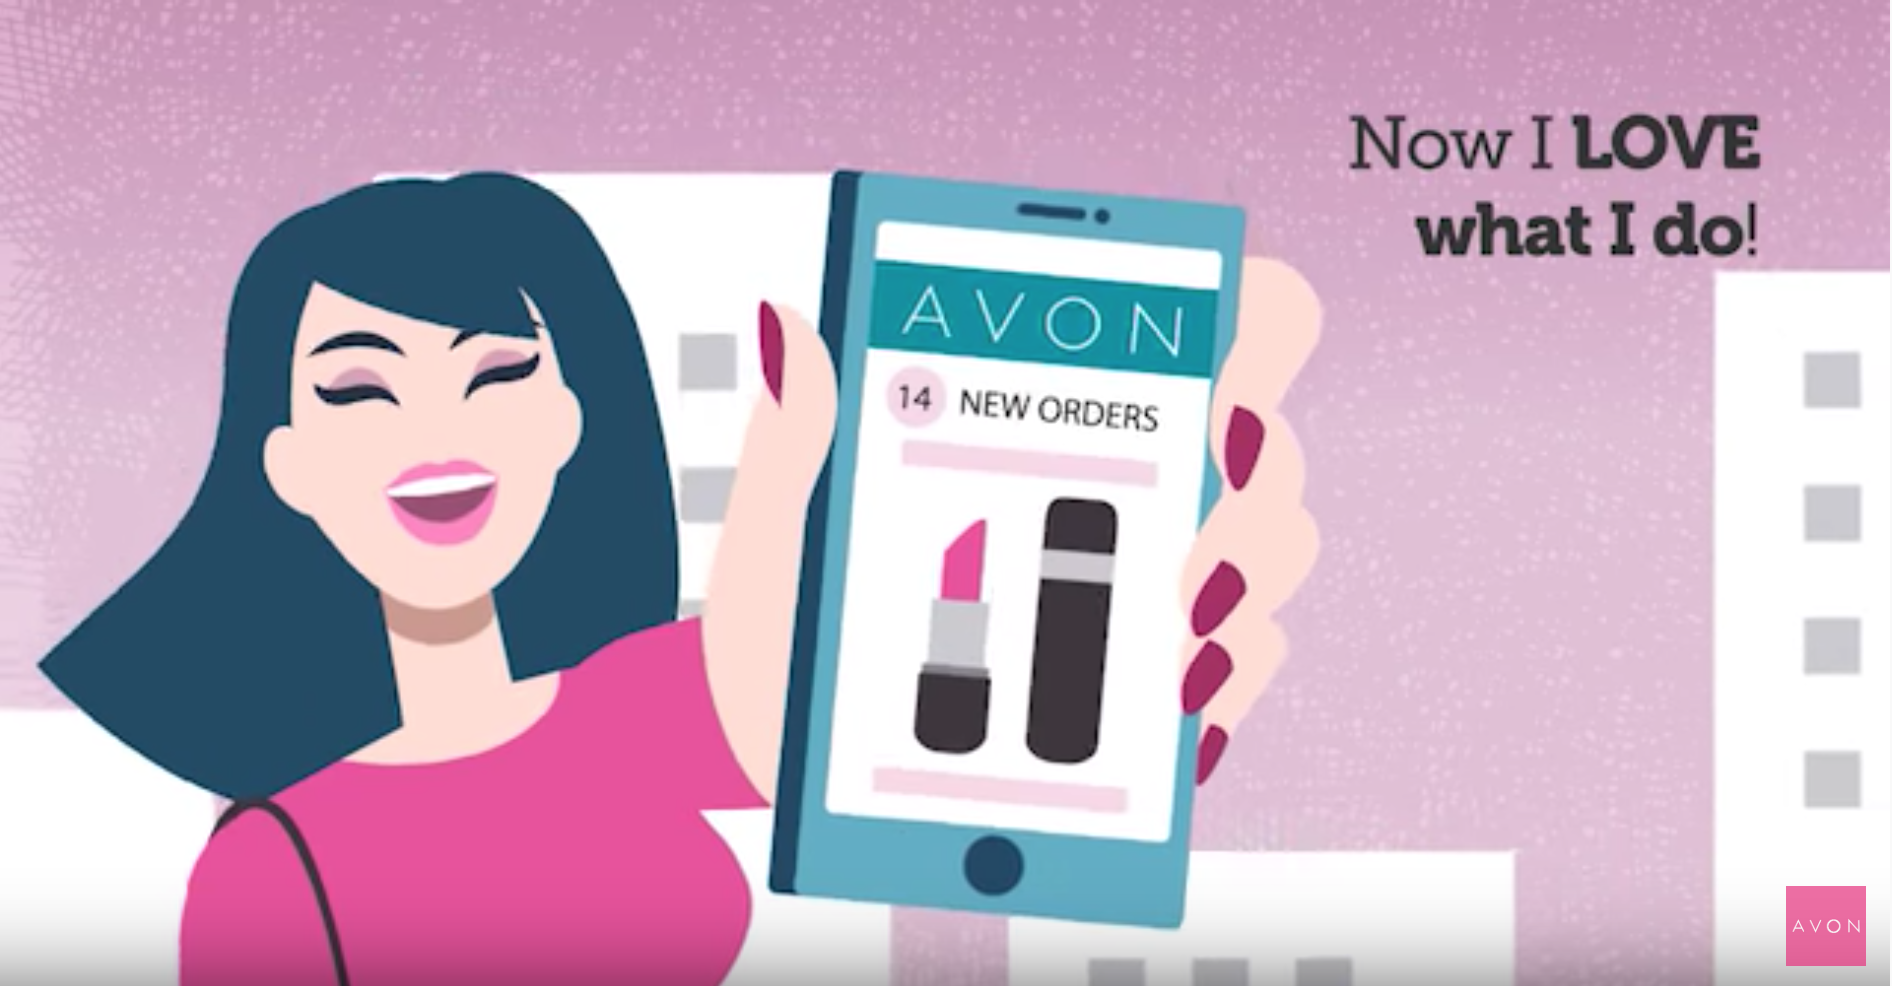 We all have a WHY. Make yours happen today with Avon for $0.